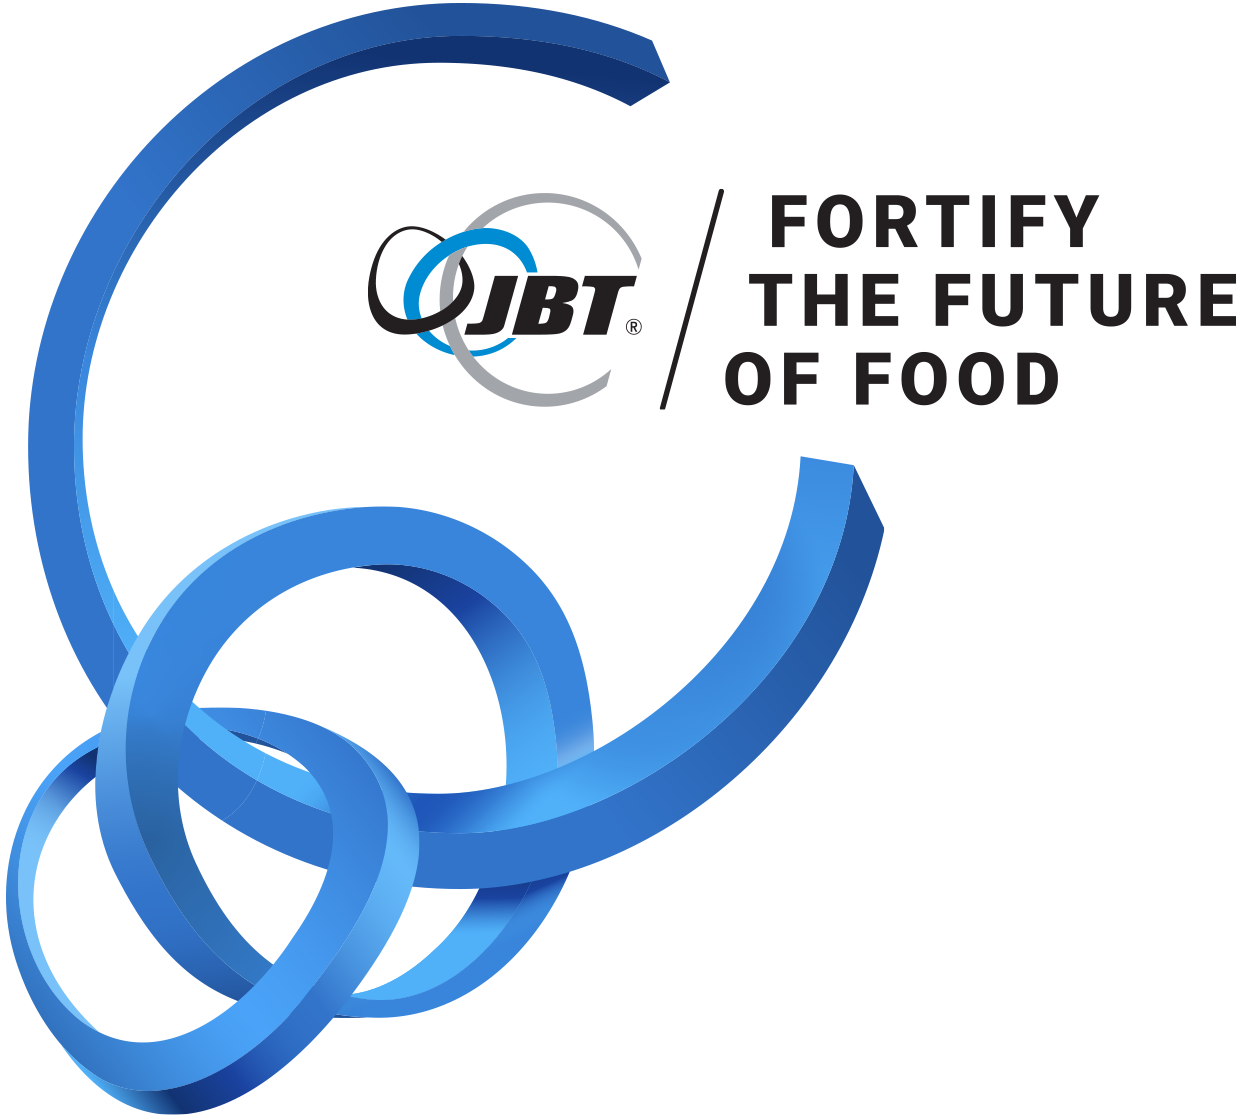 JBT Alco Fortify the Future of Food